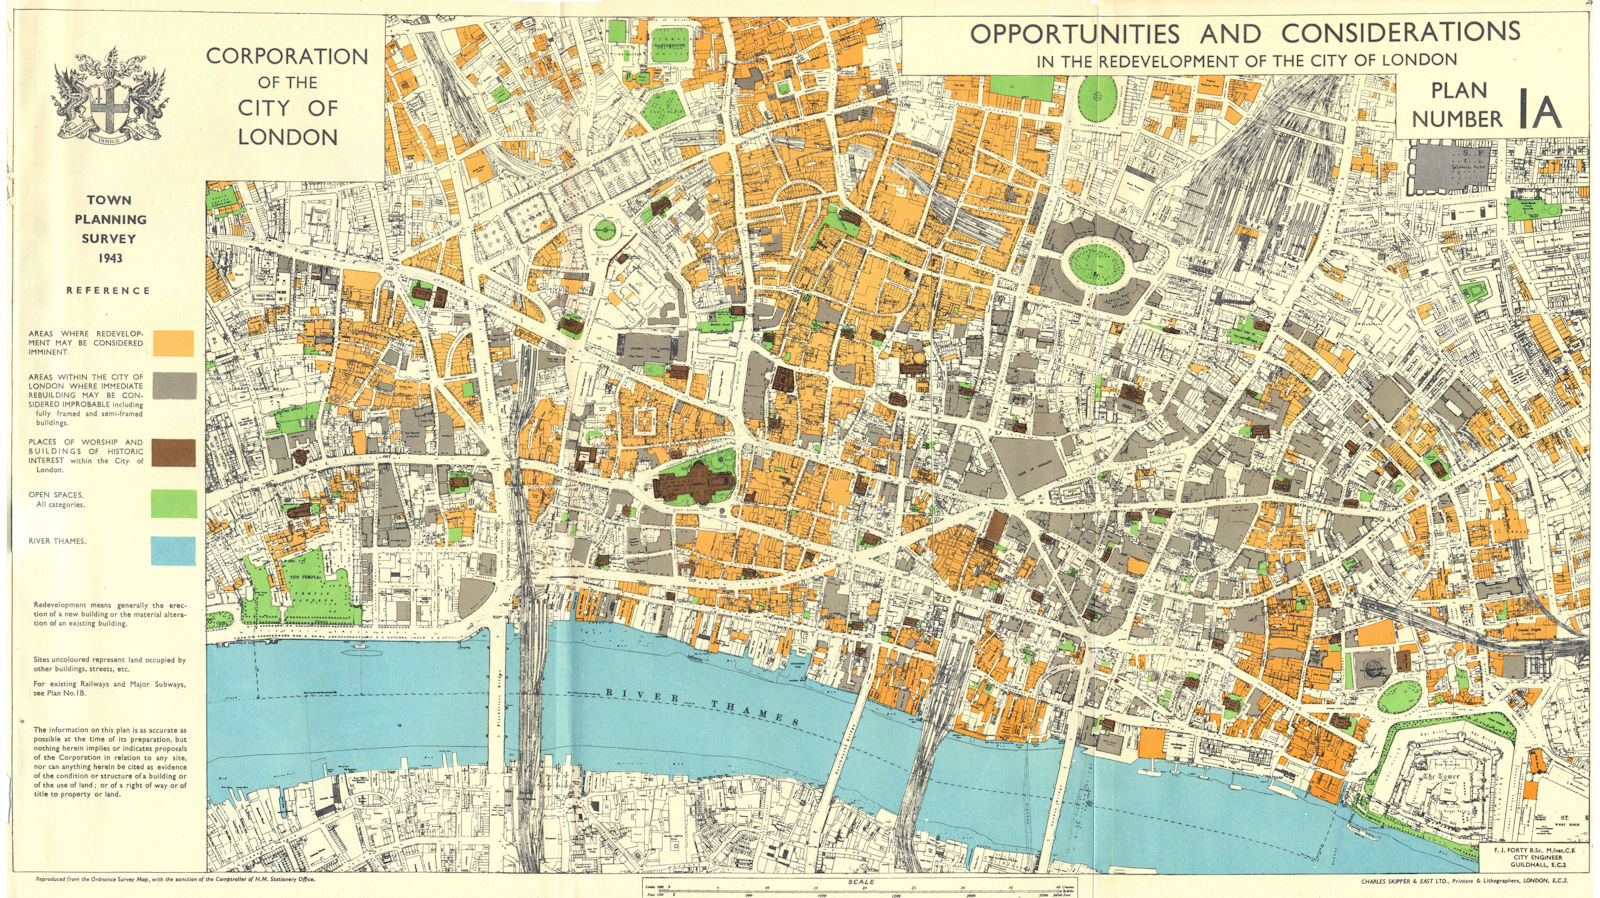 CITY OF LONDON.1943 survey. POST-WAR REDEVELOPMENT OPPORTUNITIES 1944 old map